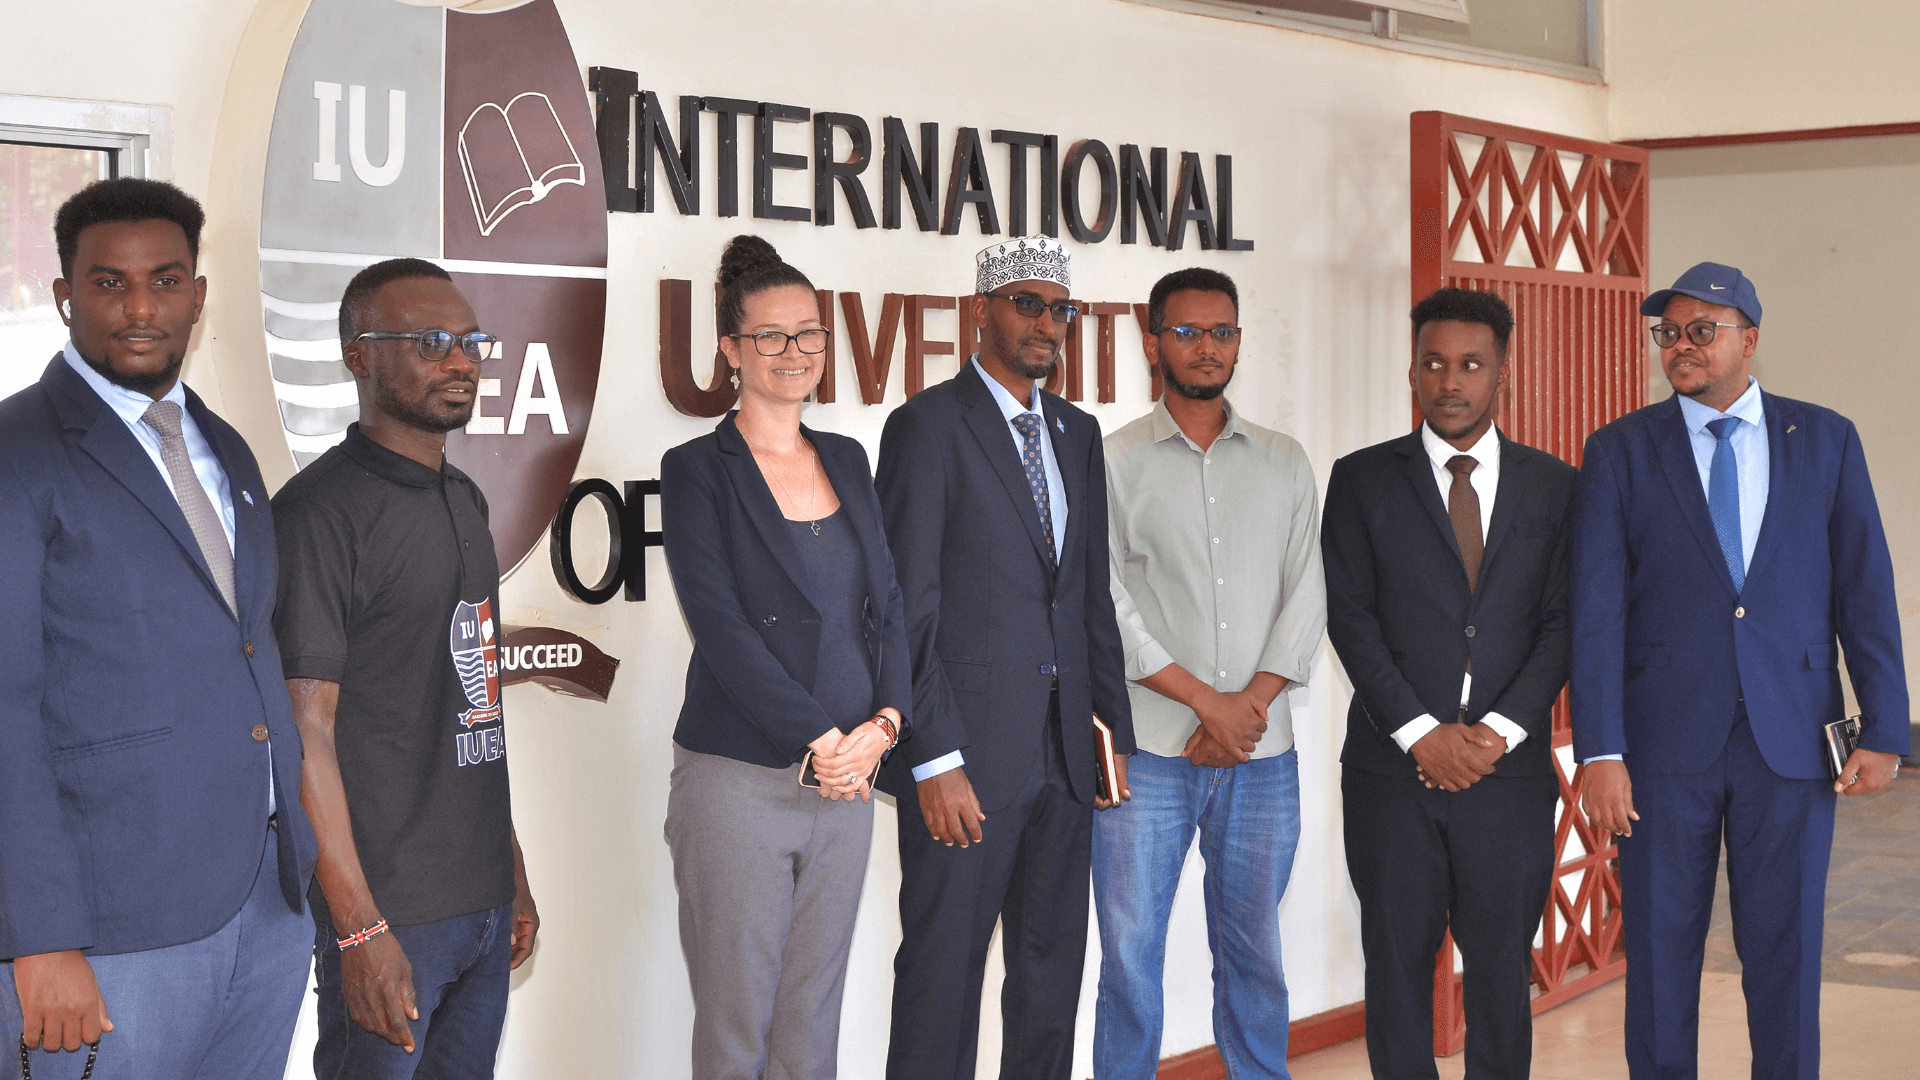 IUEA welcomes the Somali Ambassador in Uganda with open arms during a welcoming ceremony.